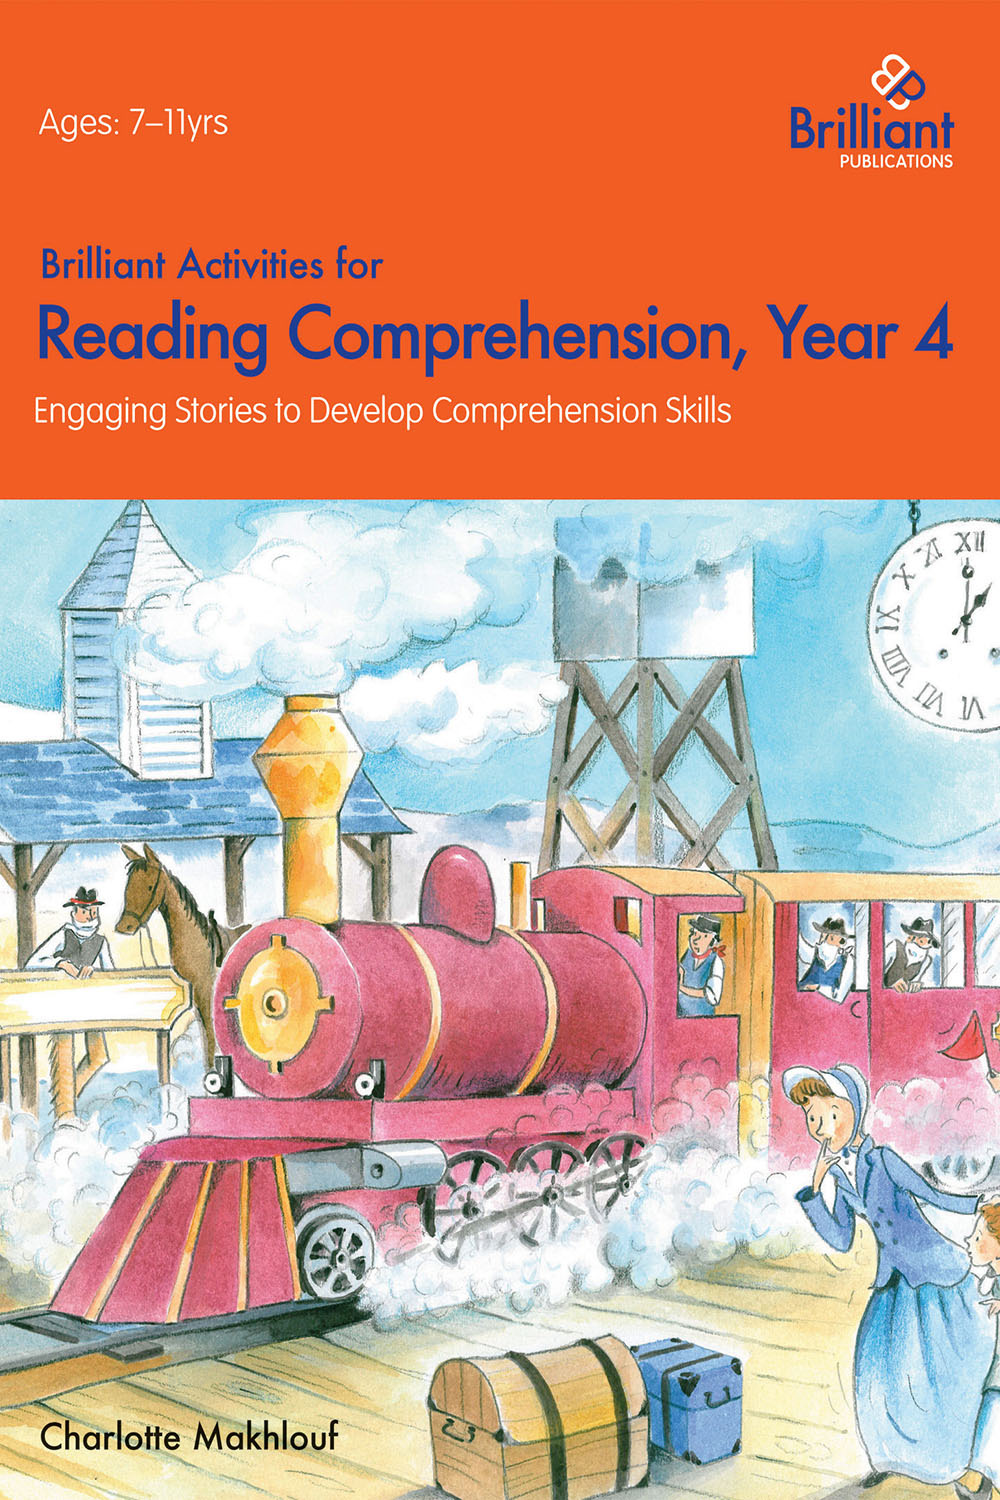 Makhlouf, Charlotte - Brilliant Activities for Reading Comprehension Year 4, ebook